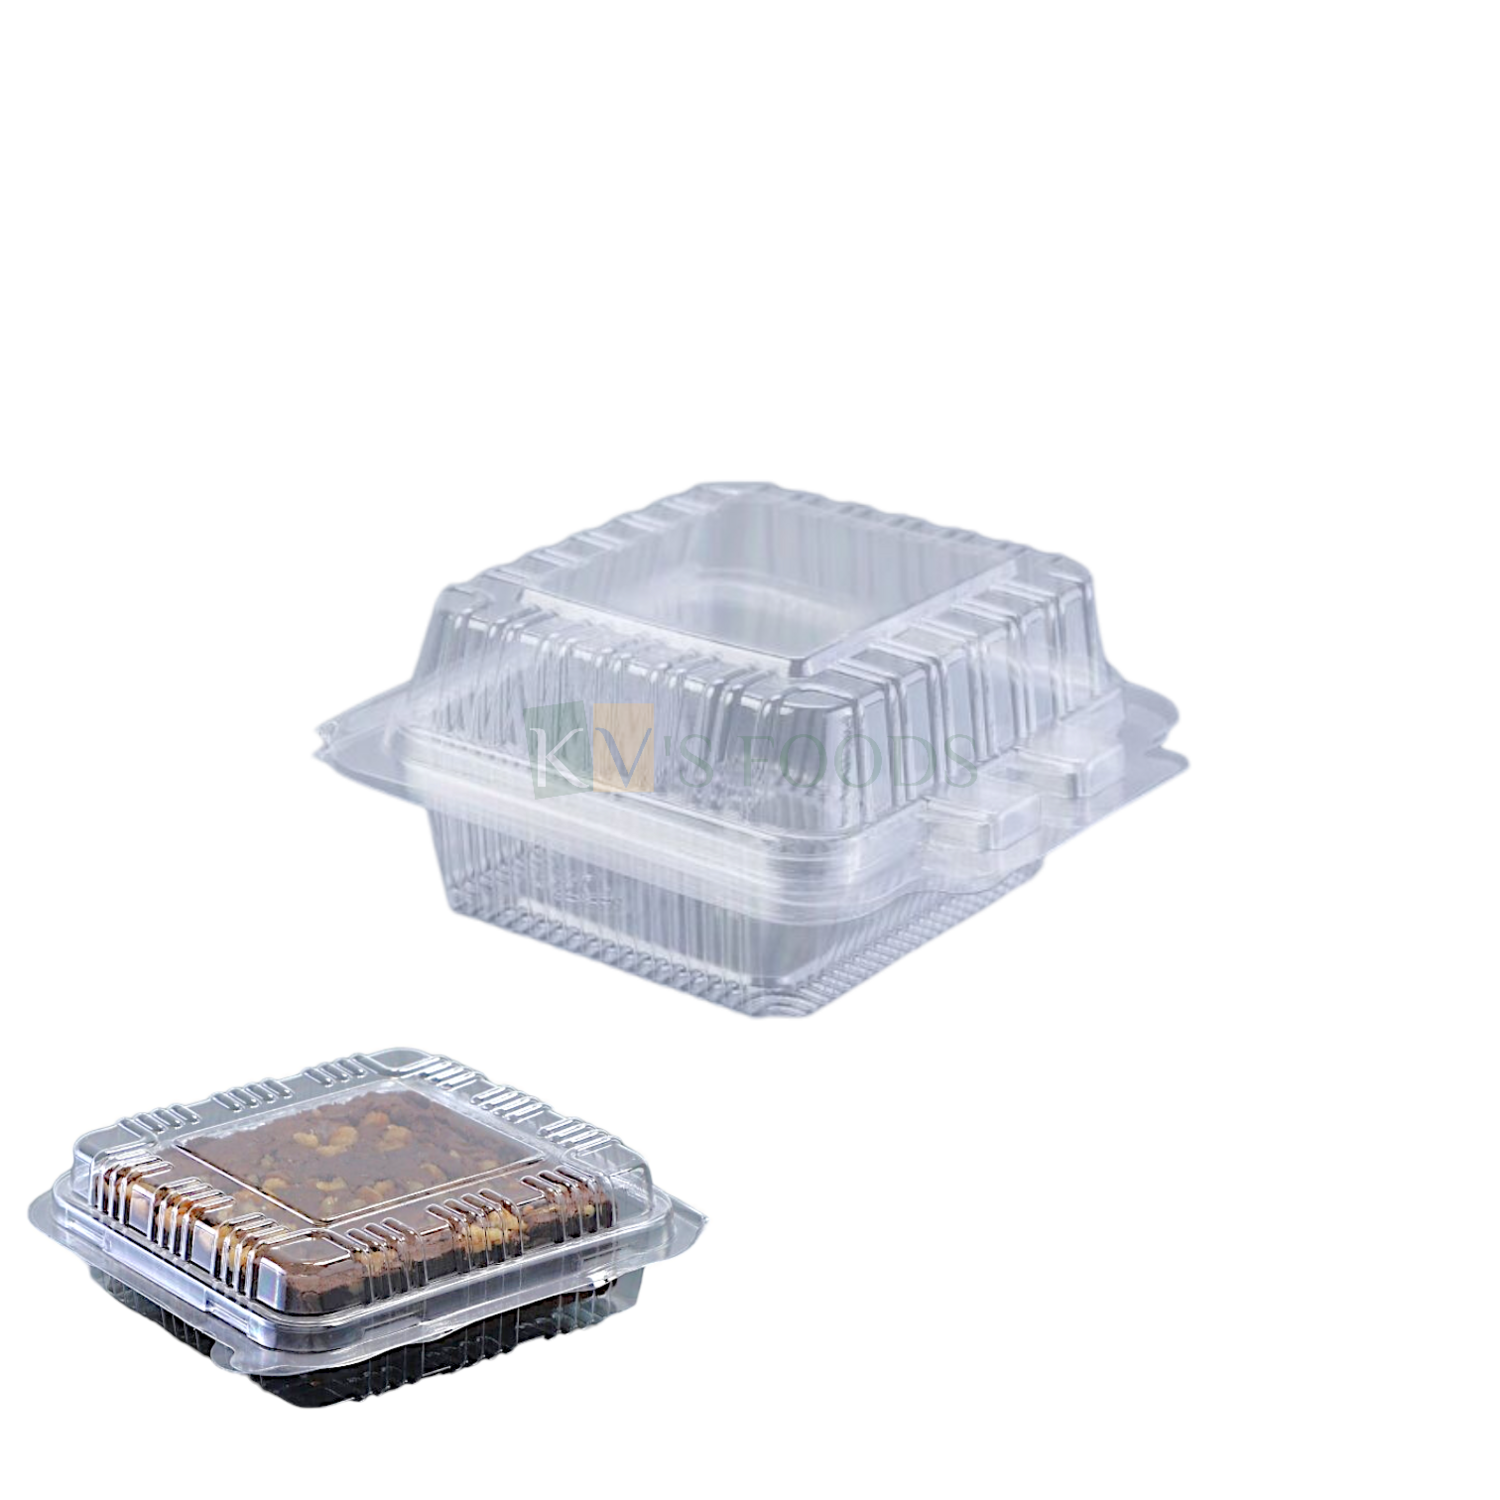 10 PCS Size 2.1 x 2.1 Inch, Height 1.6 Inches Capacity ~50 ML Hinged 1 Brownie Square Packaging Container with Dome Lid Bakery Accessories Transparent Small Deep Food Box Show Bowl Clamshell Container